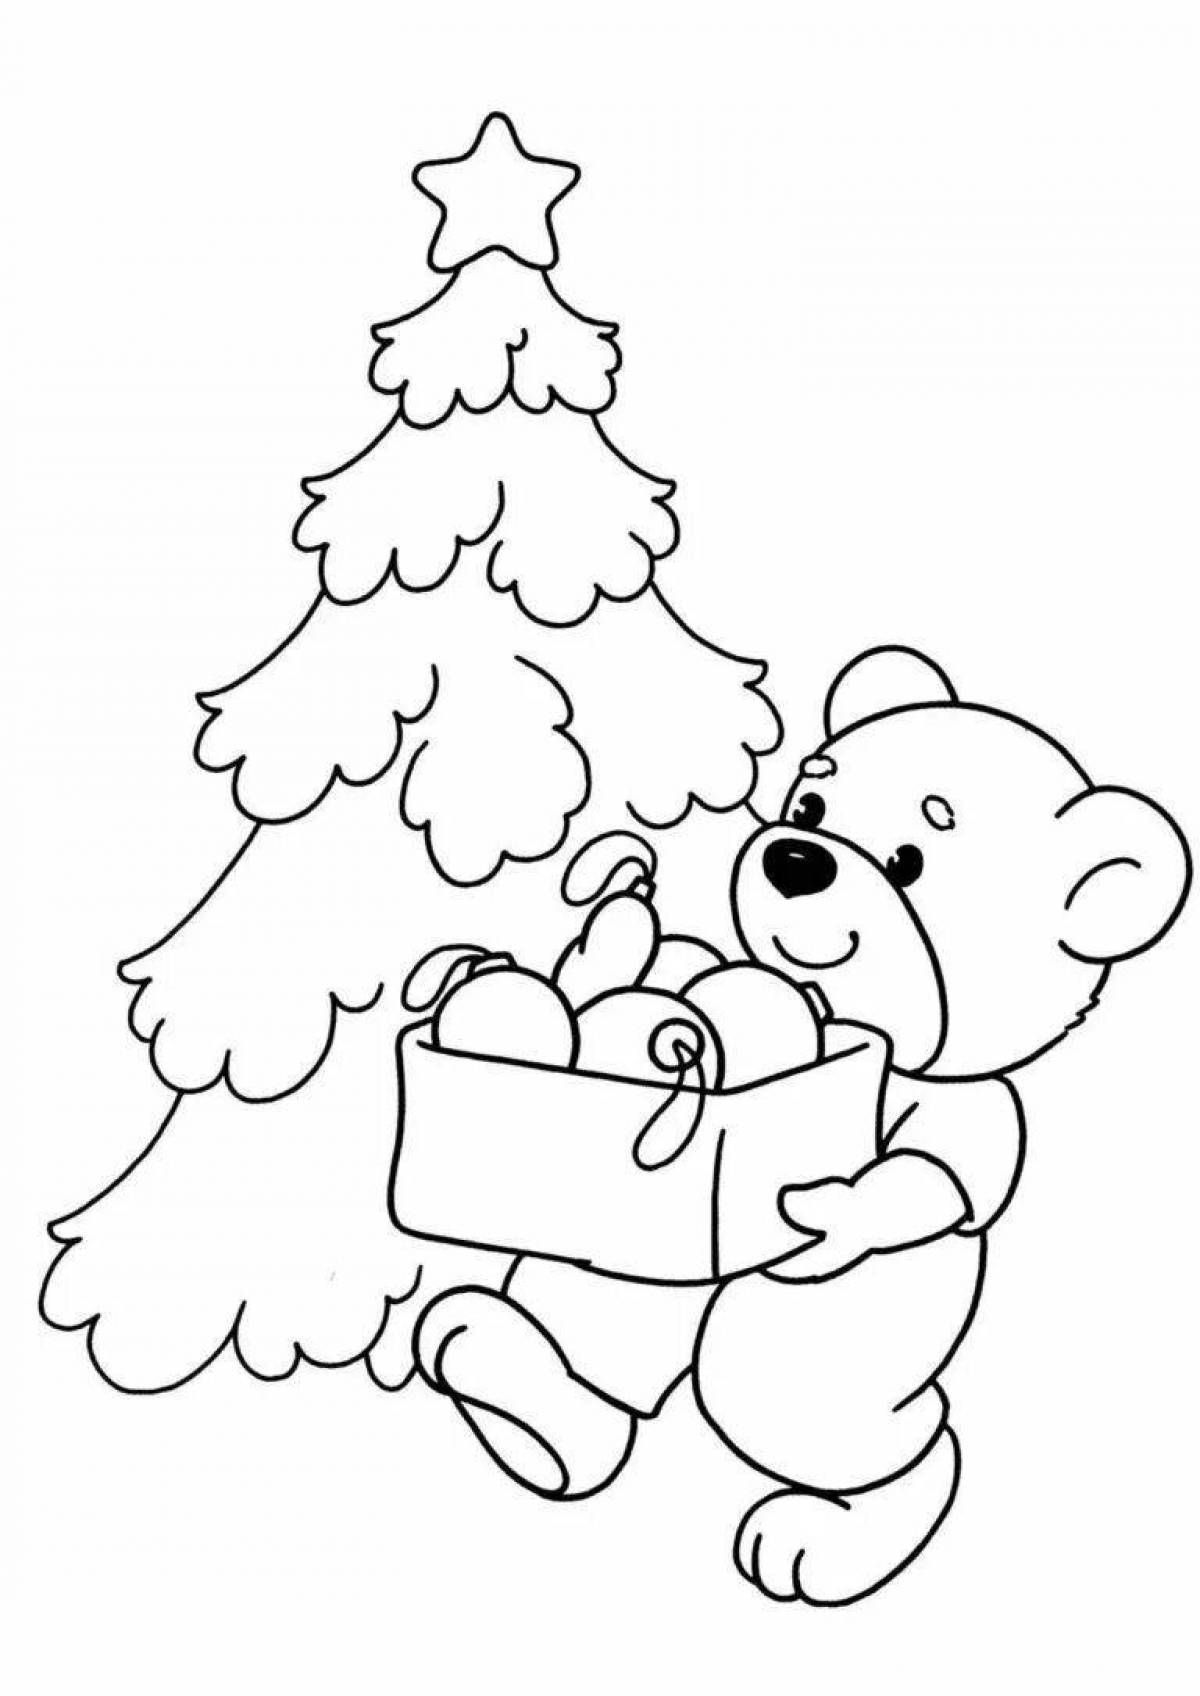 Exciting Christmas coloring book for toddlers